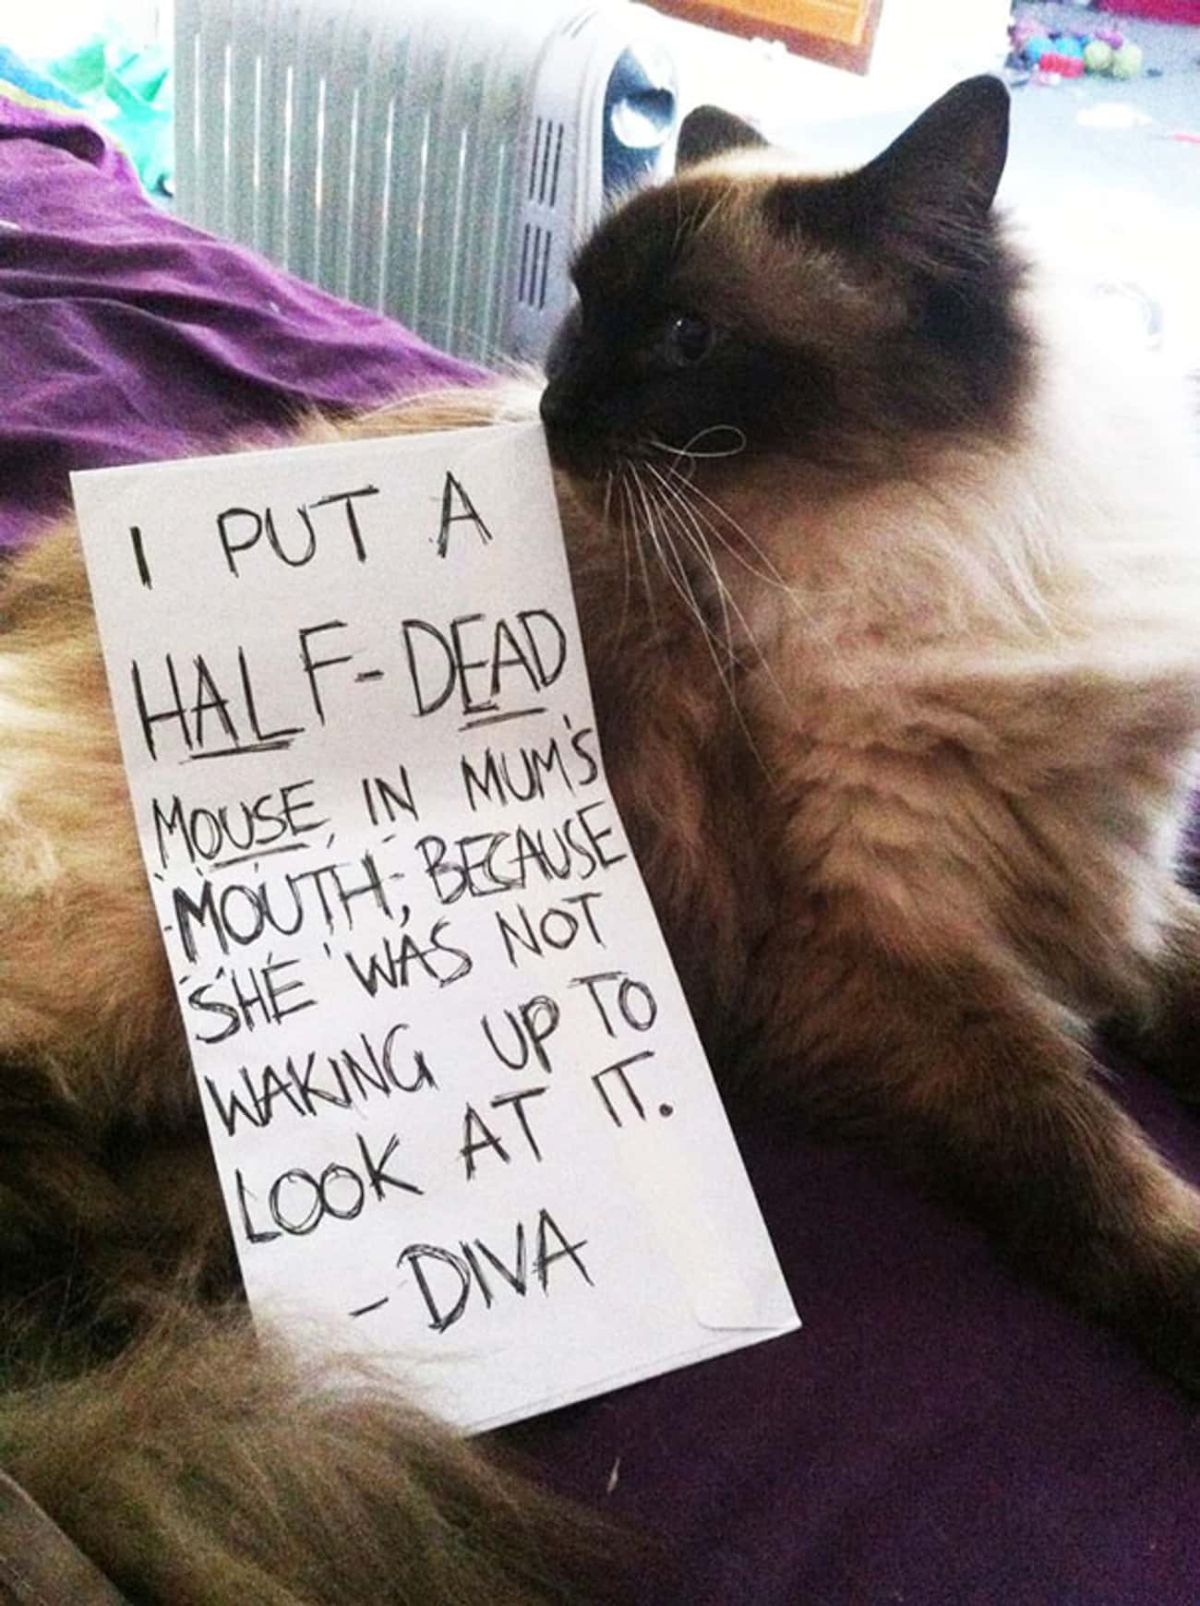 fluffy brown and black siamese cat laying on a purple bed with a note saying the cat put a half-dead mouse in mum's mouth because she wasn't waking up to look